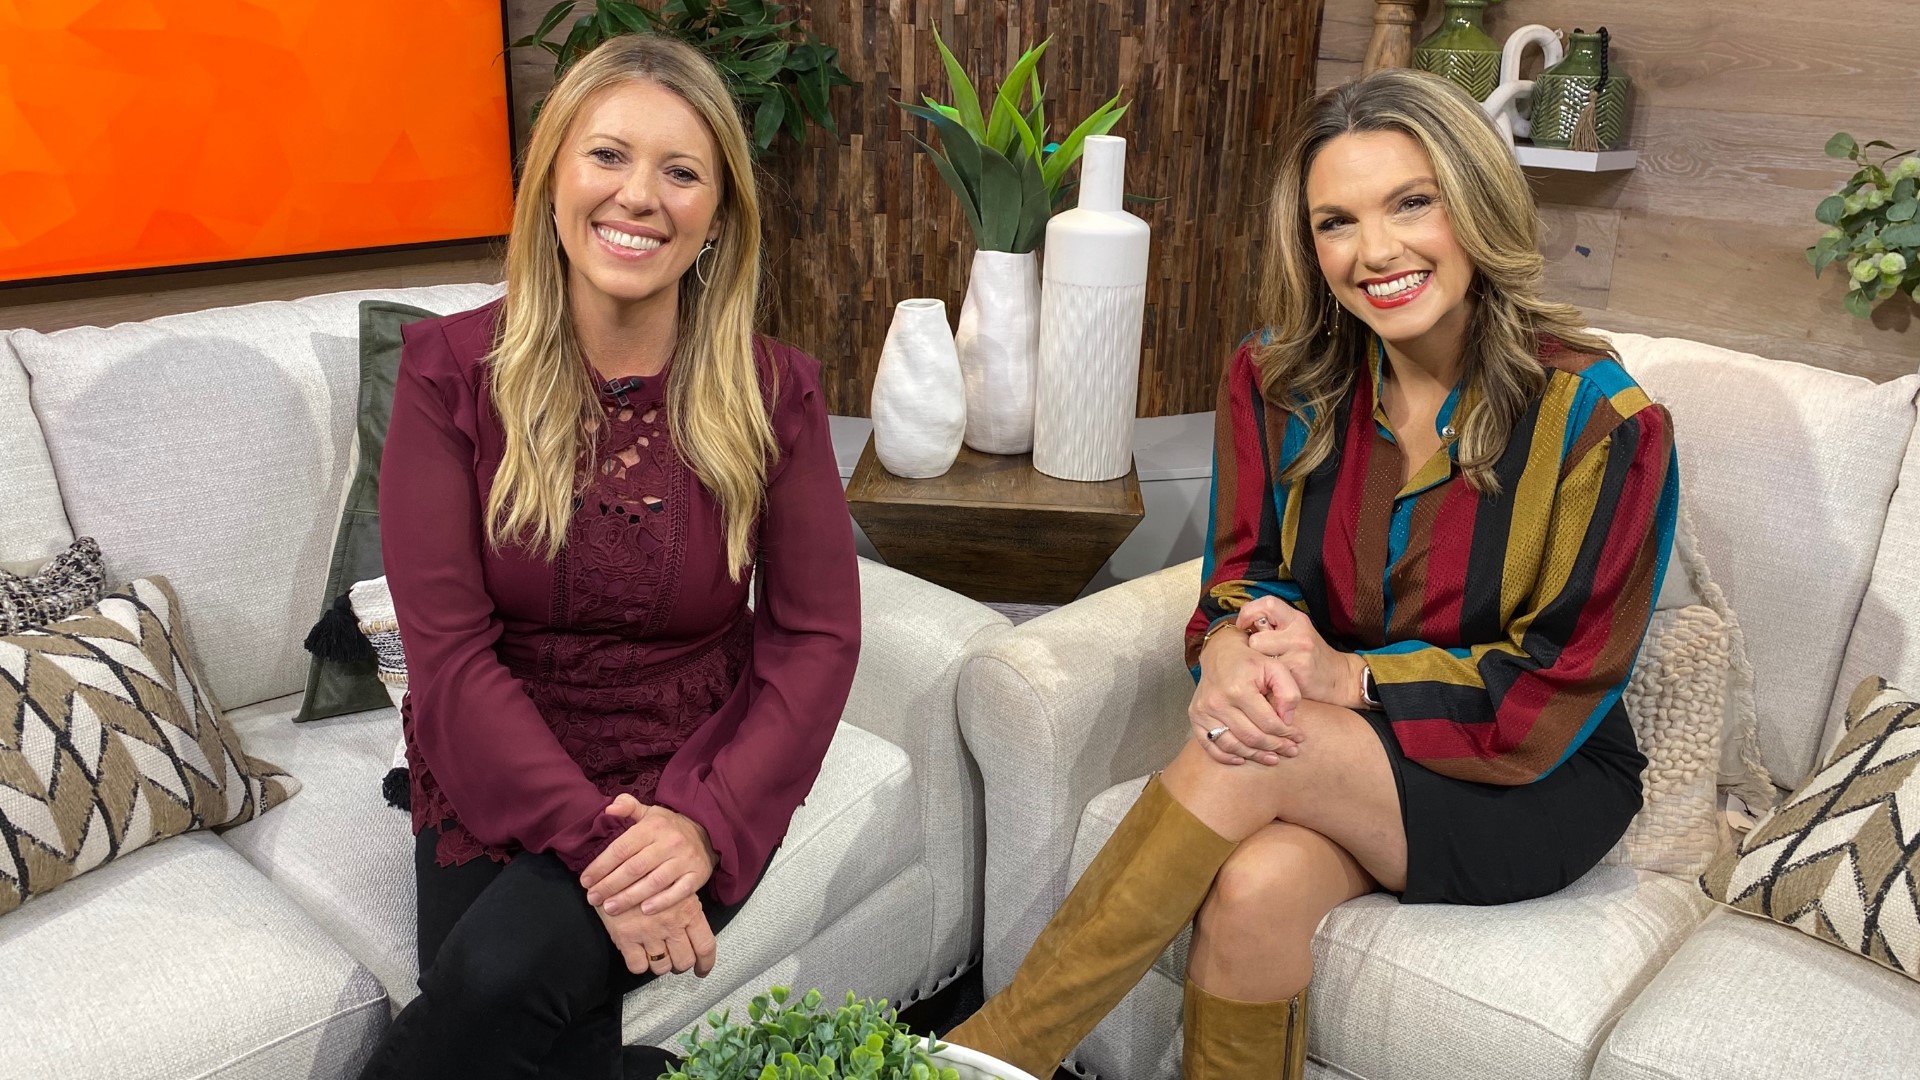 Natasha, a former KING 5 news anchor, joined Amity to talk about fall decorations and Hallmark movies! #newdaynw